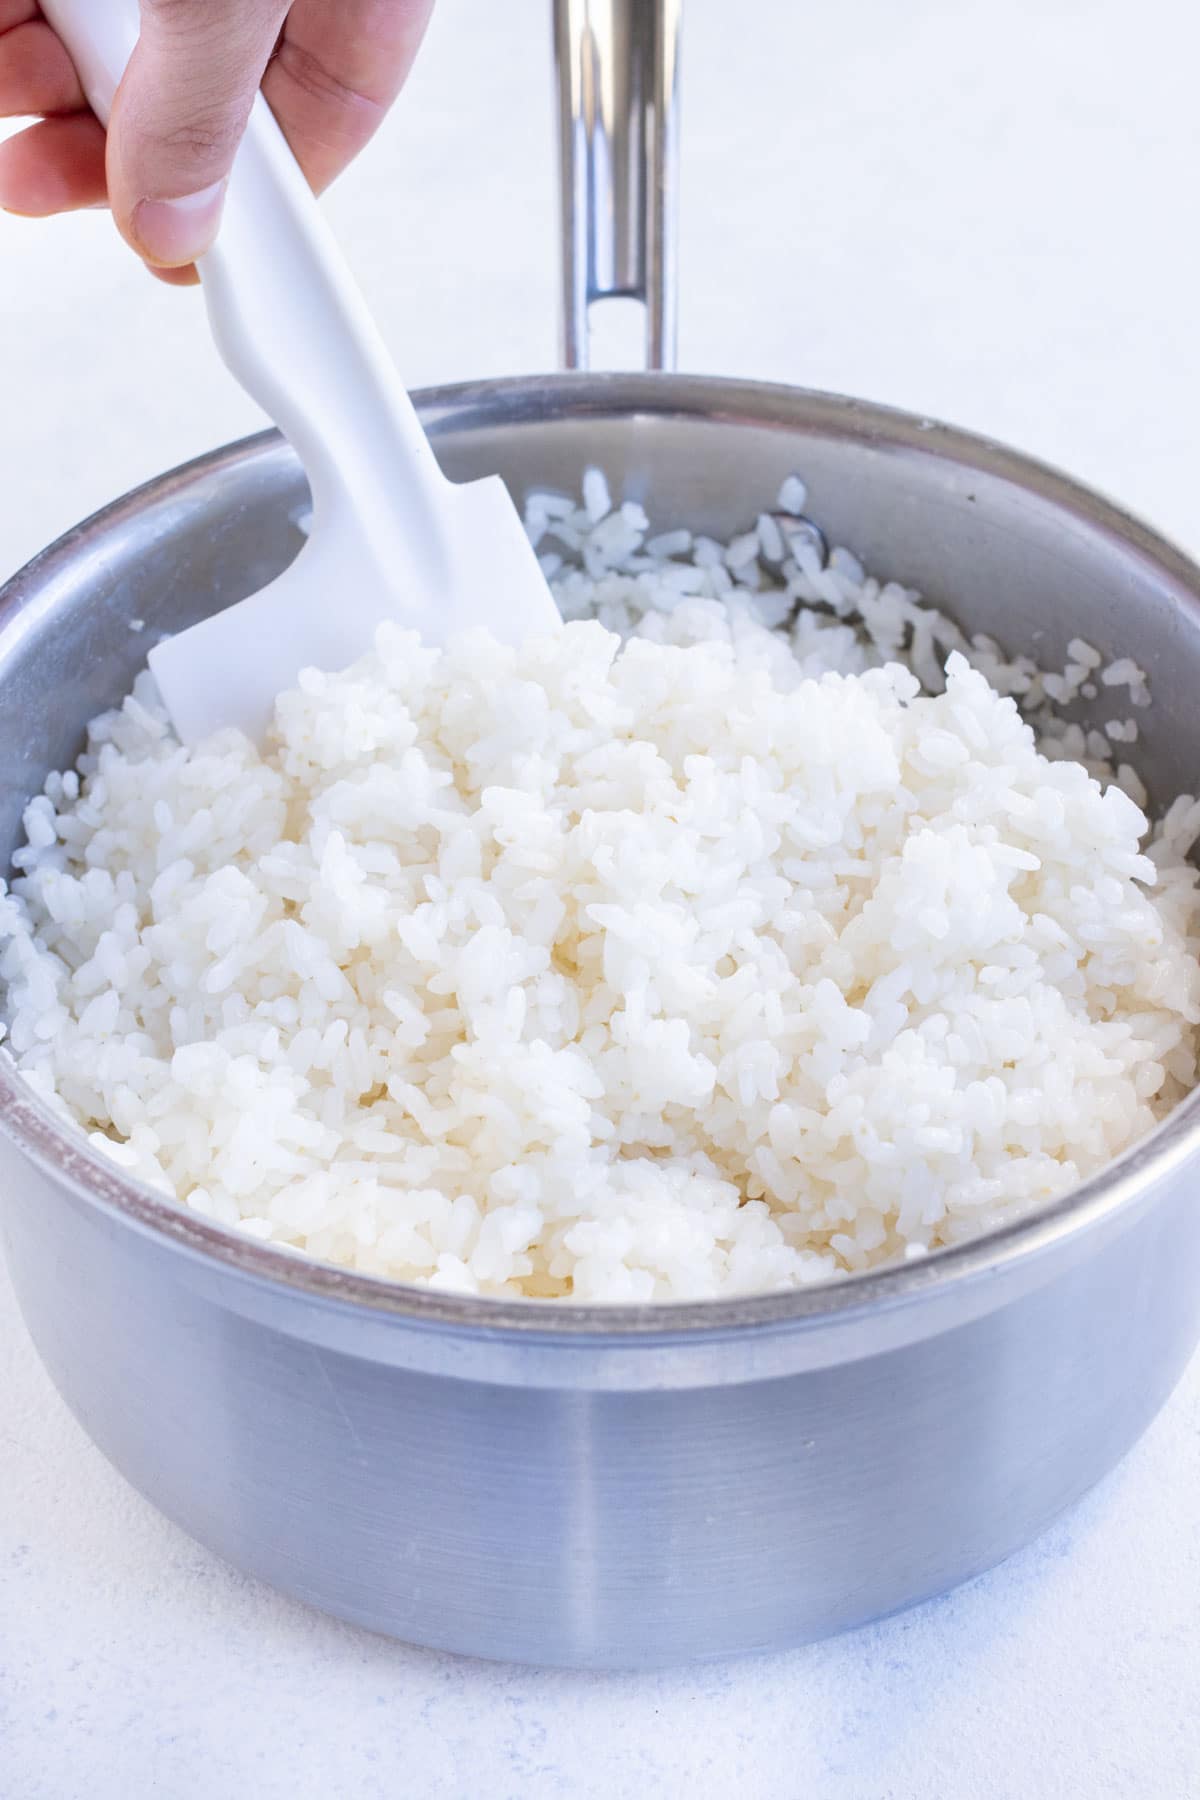 Sushi rice is mixed together with vinegar mixture.